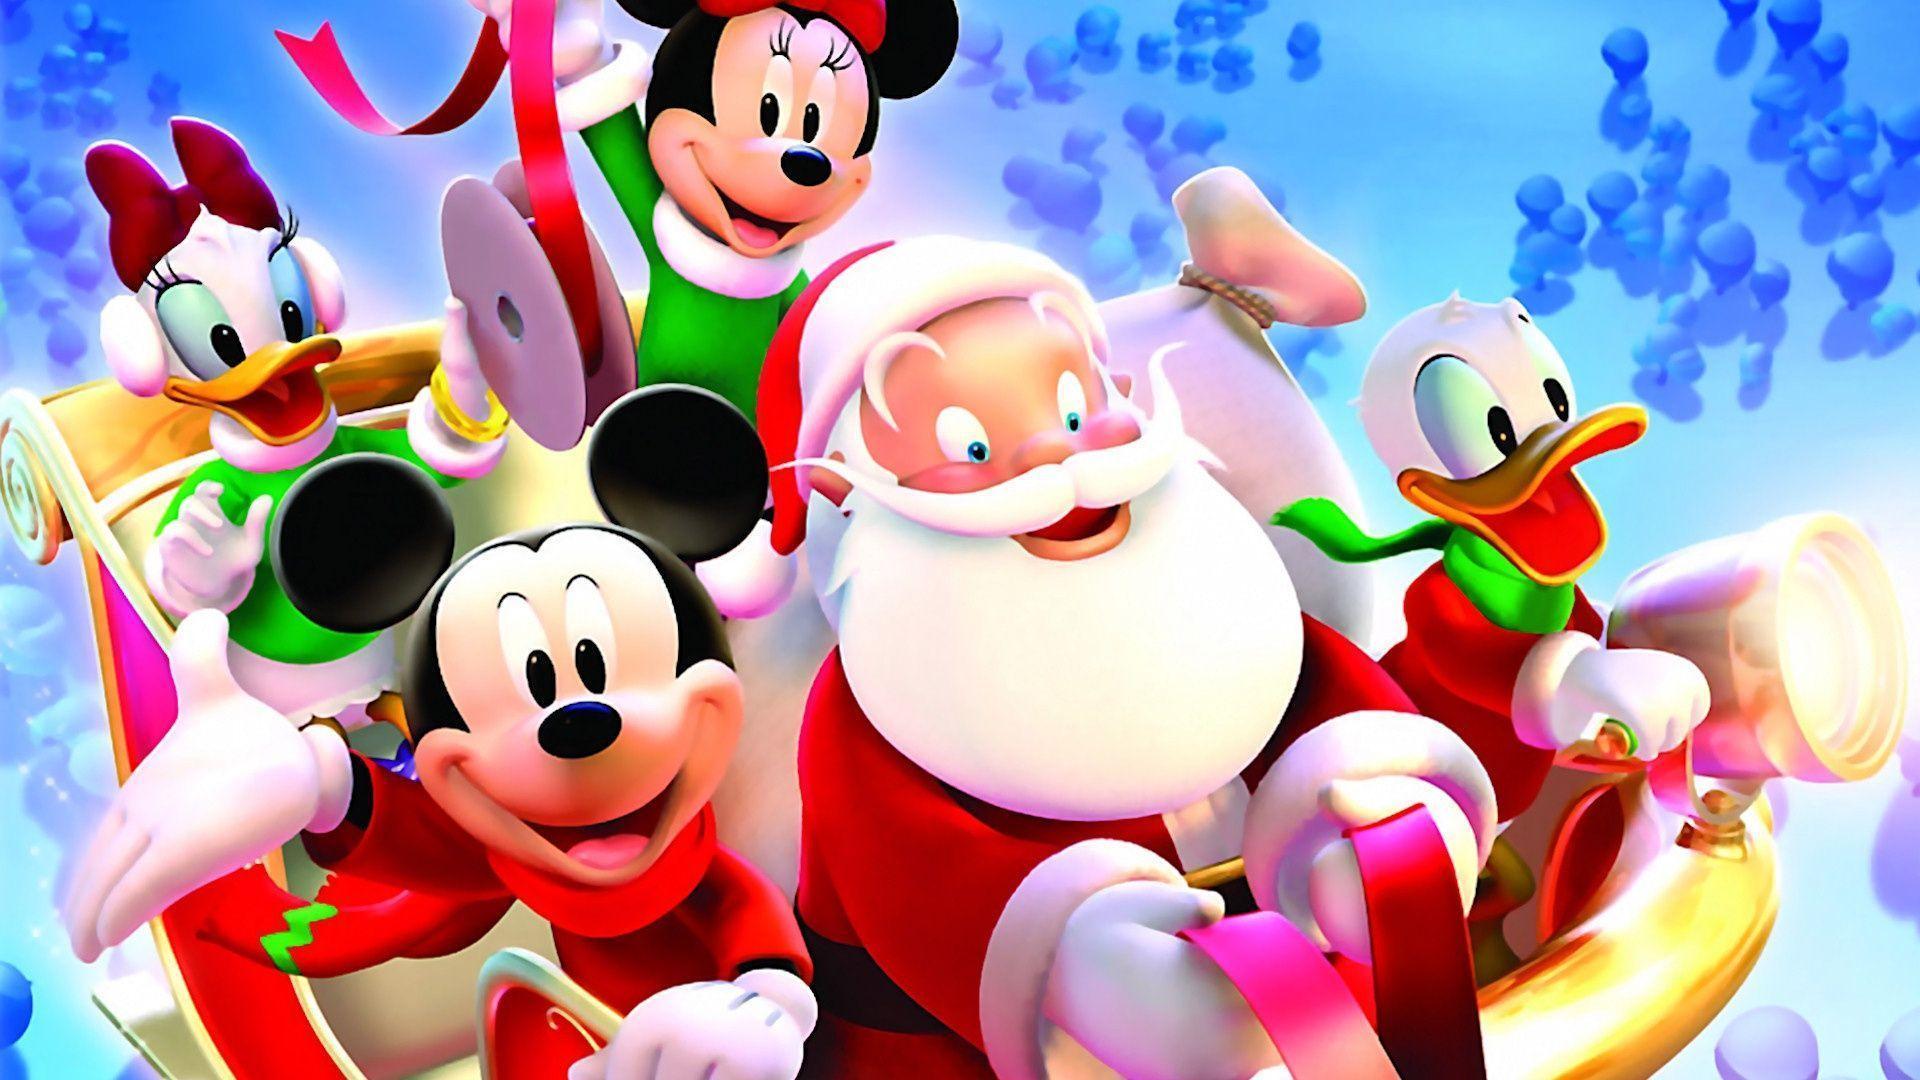 Merry Christmas 2014 Wallpaper for Kids Free Download. Christmas